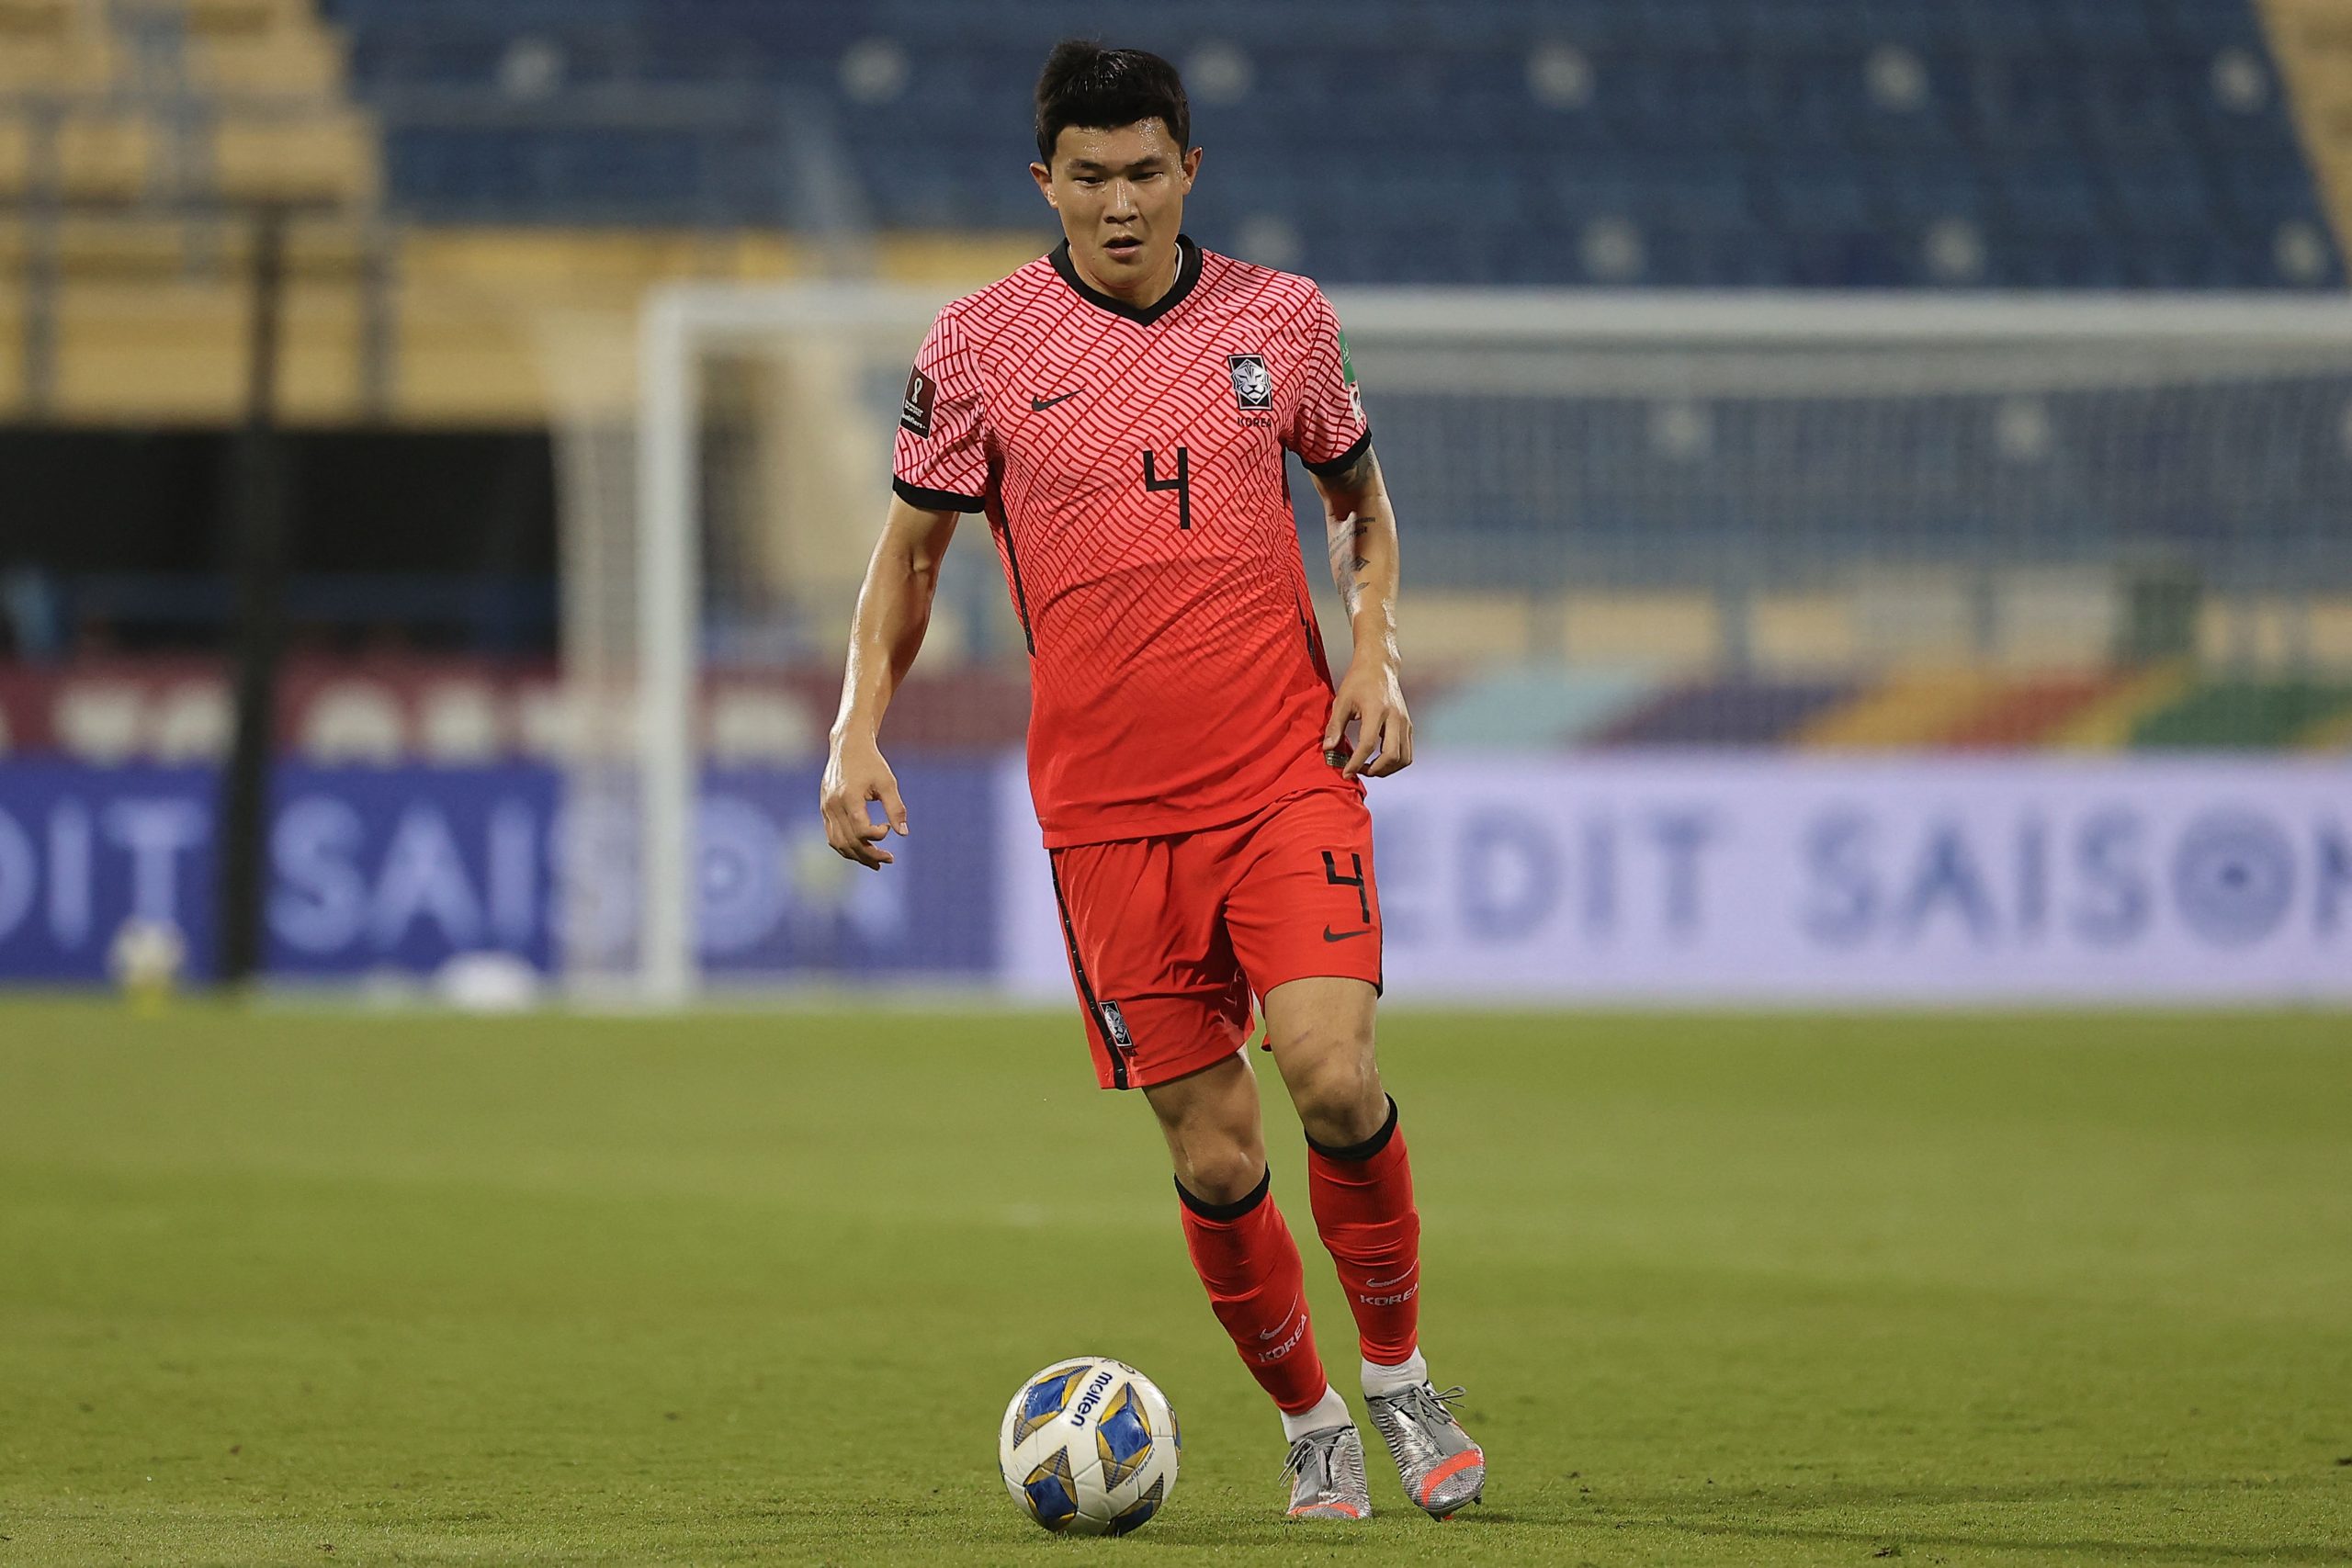 Kim Min-jae was scouted by Tottenham recently. (Photo by KARIM JAAFAR/AFP via Getty Images)